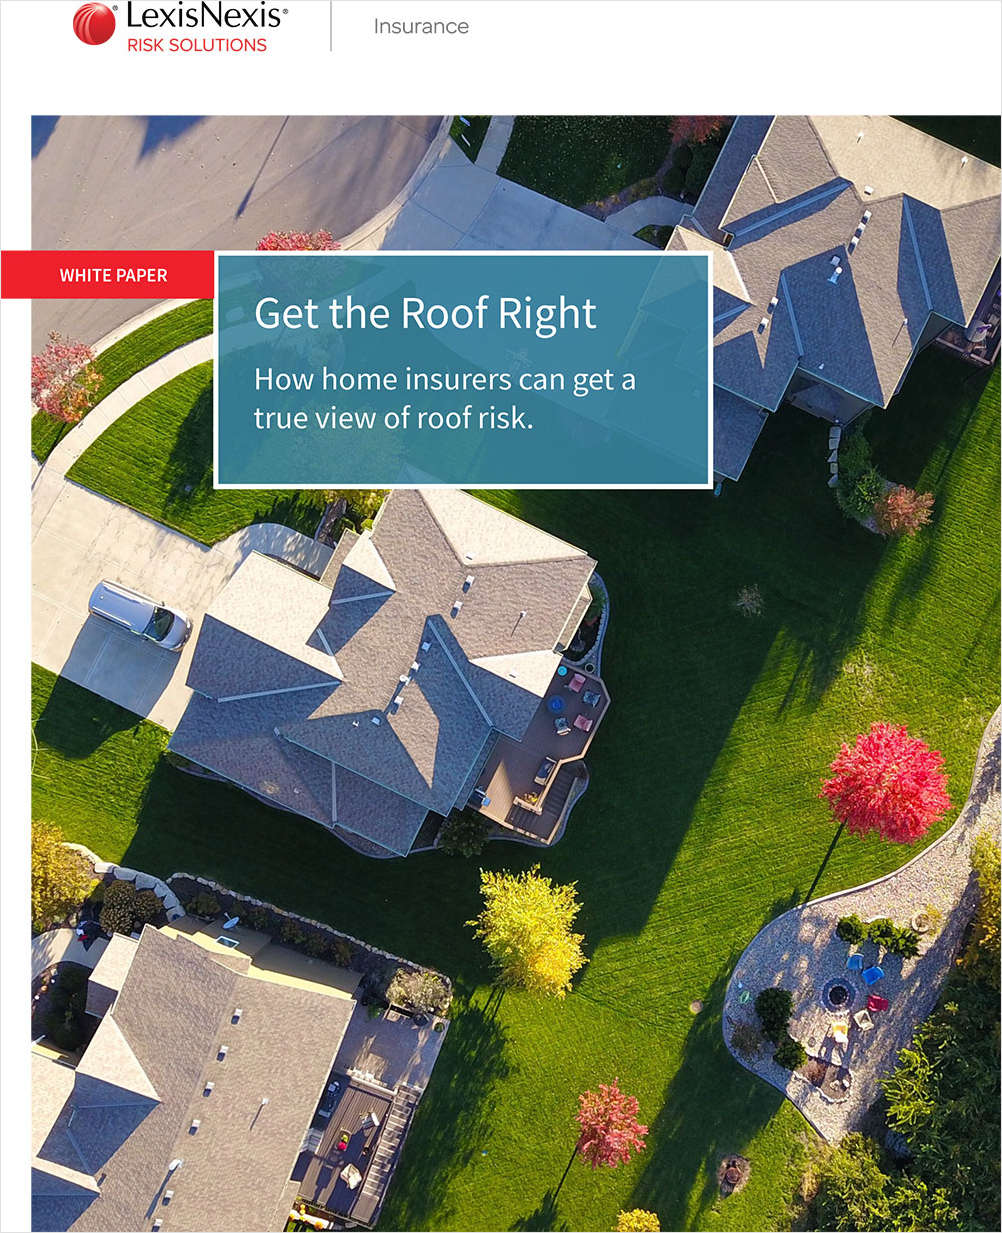 Get the Roof Right: How Home Insurers Can Get a True View of Roof Risk